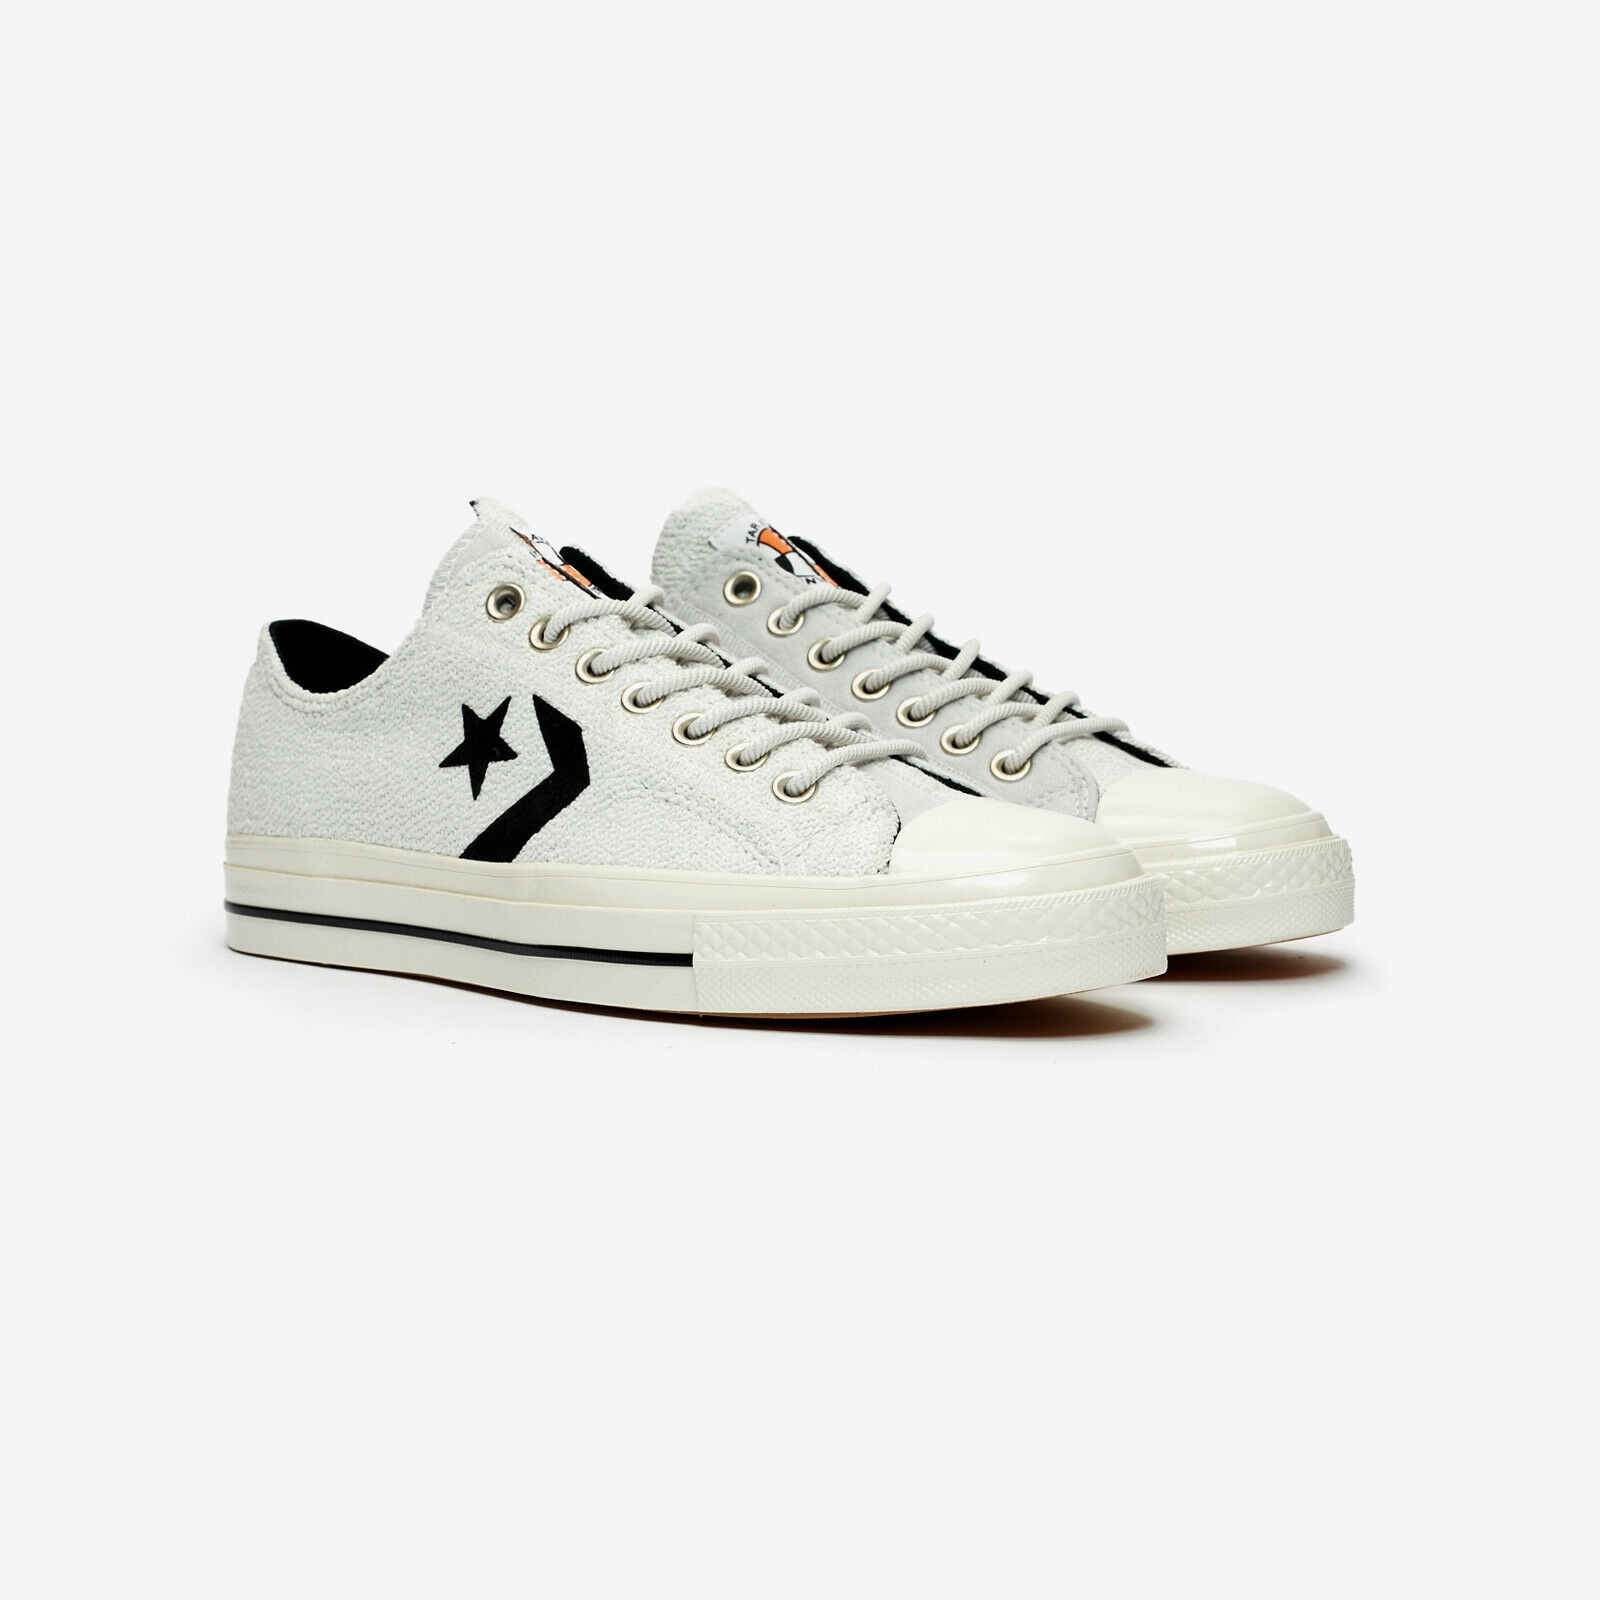 Converse Player Ox Terry 168754C Unisex White Sneakers Shoes HS5 (7.5) - Walmart.com